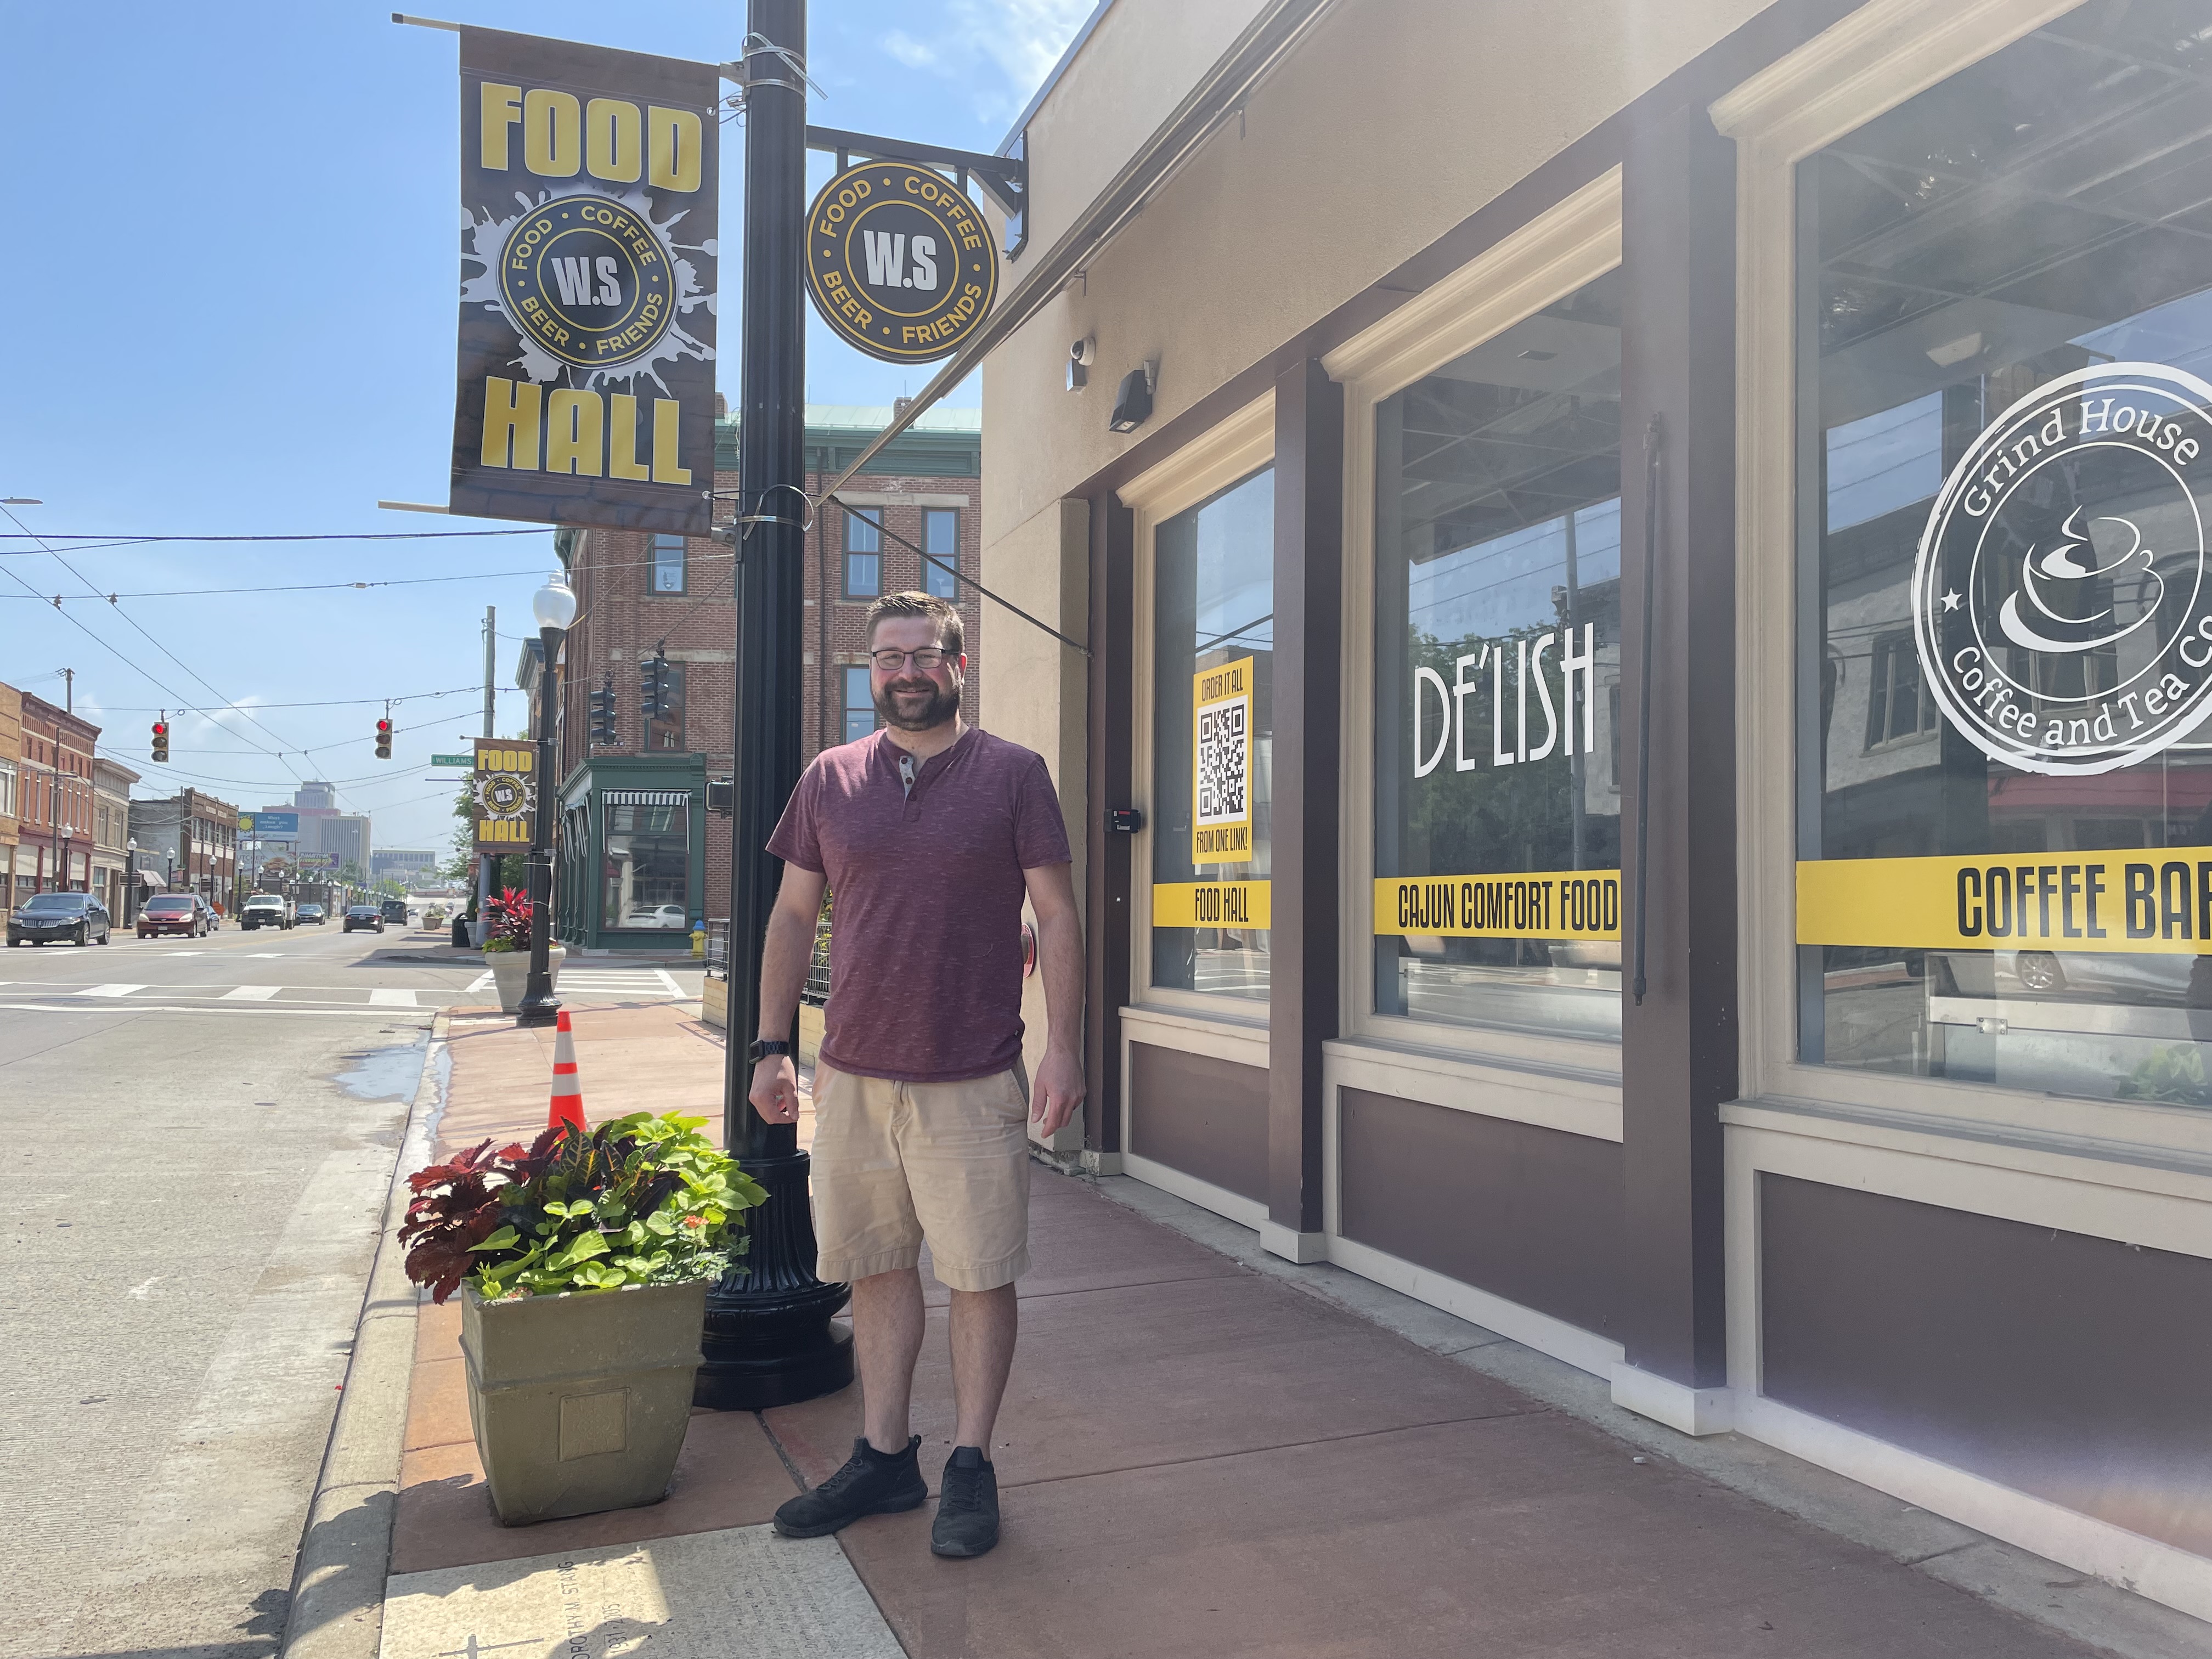 Rob Barry is the General Manager of W. Social Tap & Table, Dayton's First Food Hall located at 1100 W. Third Street.